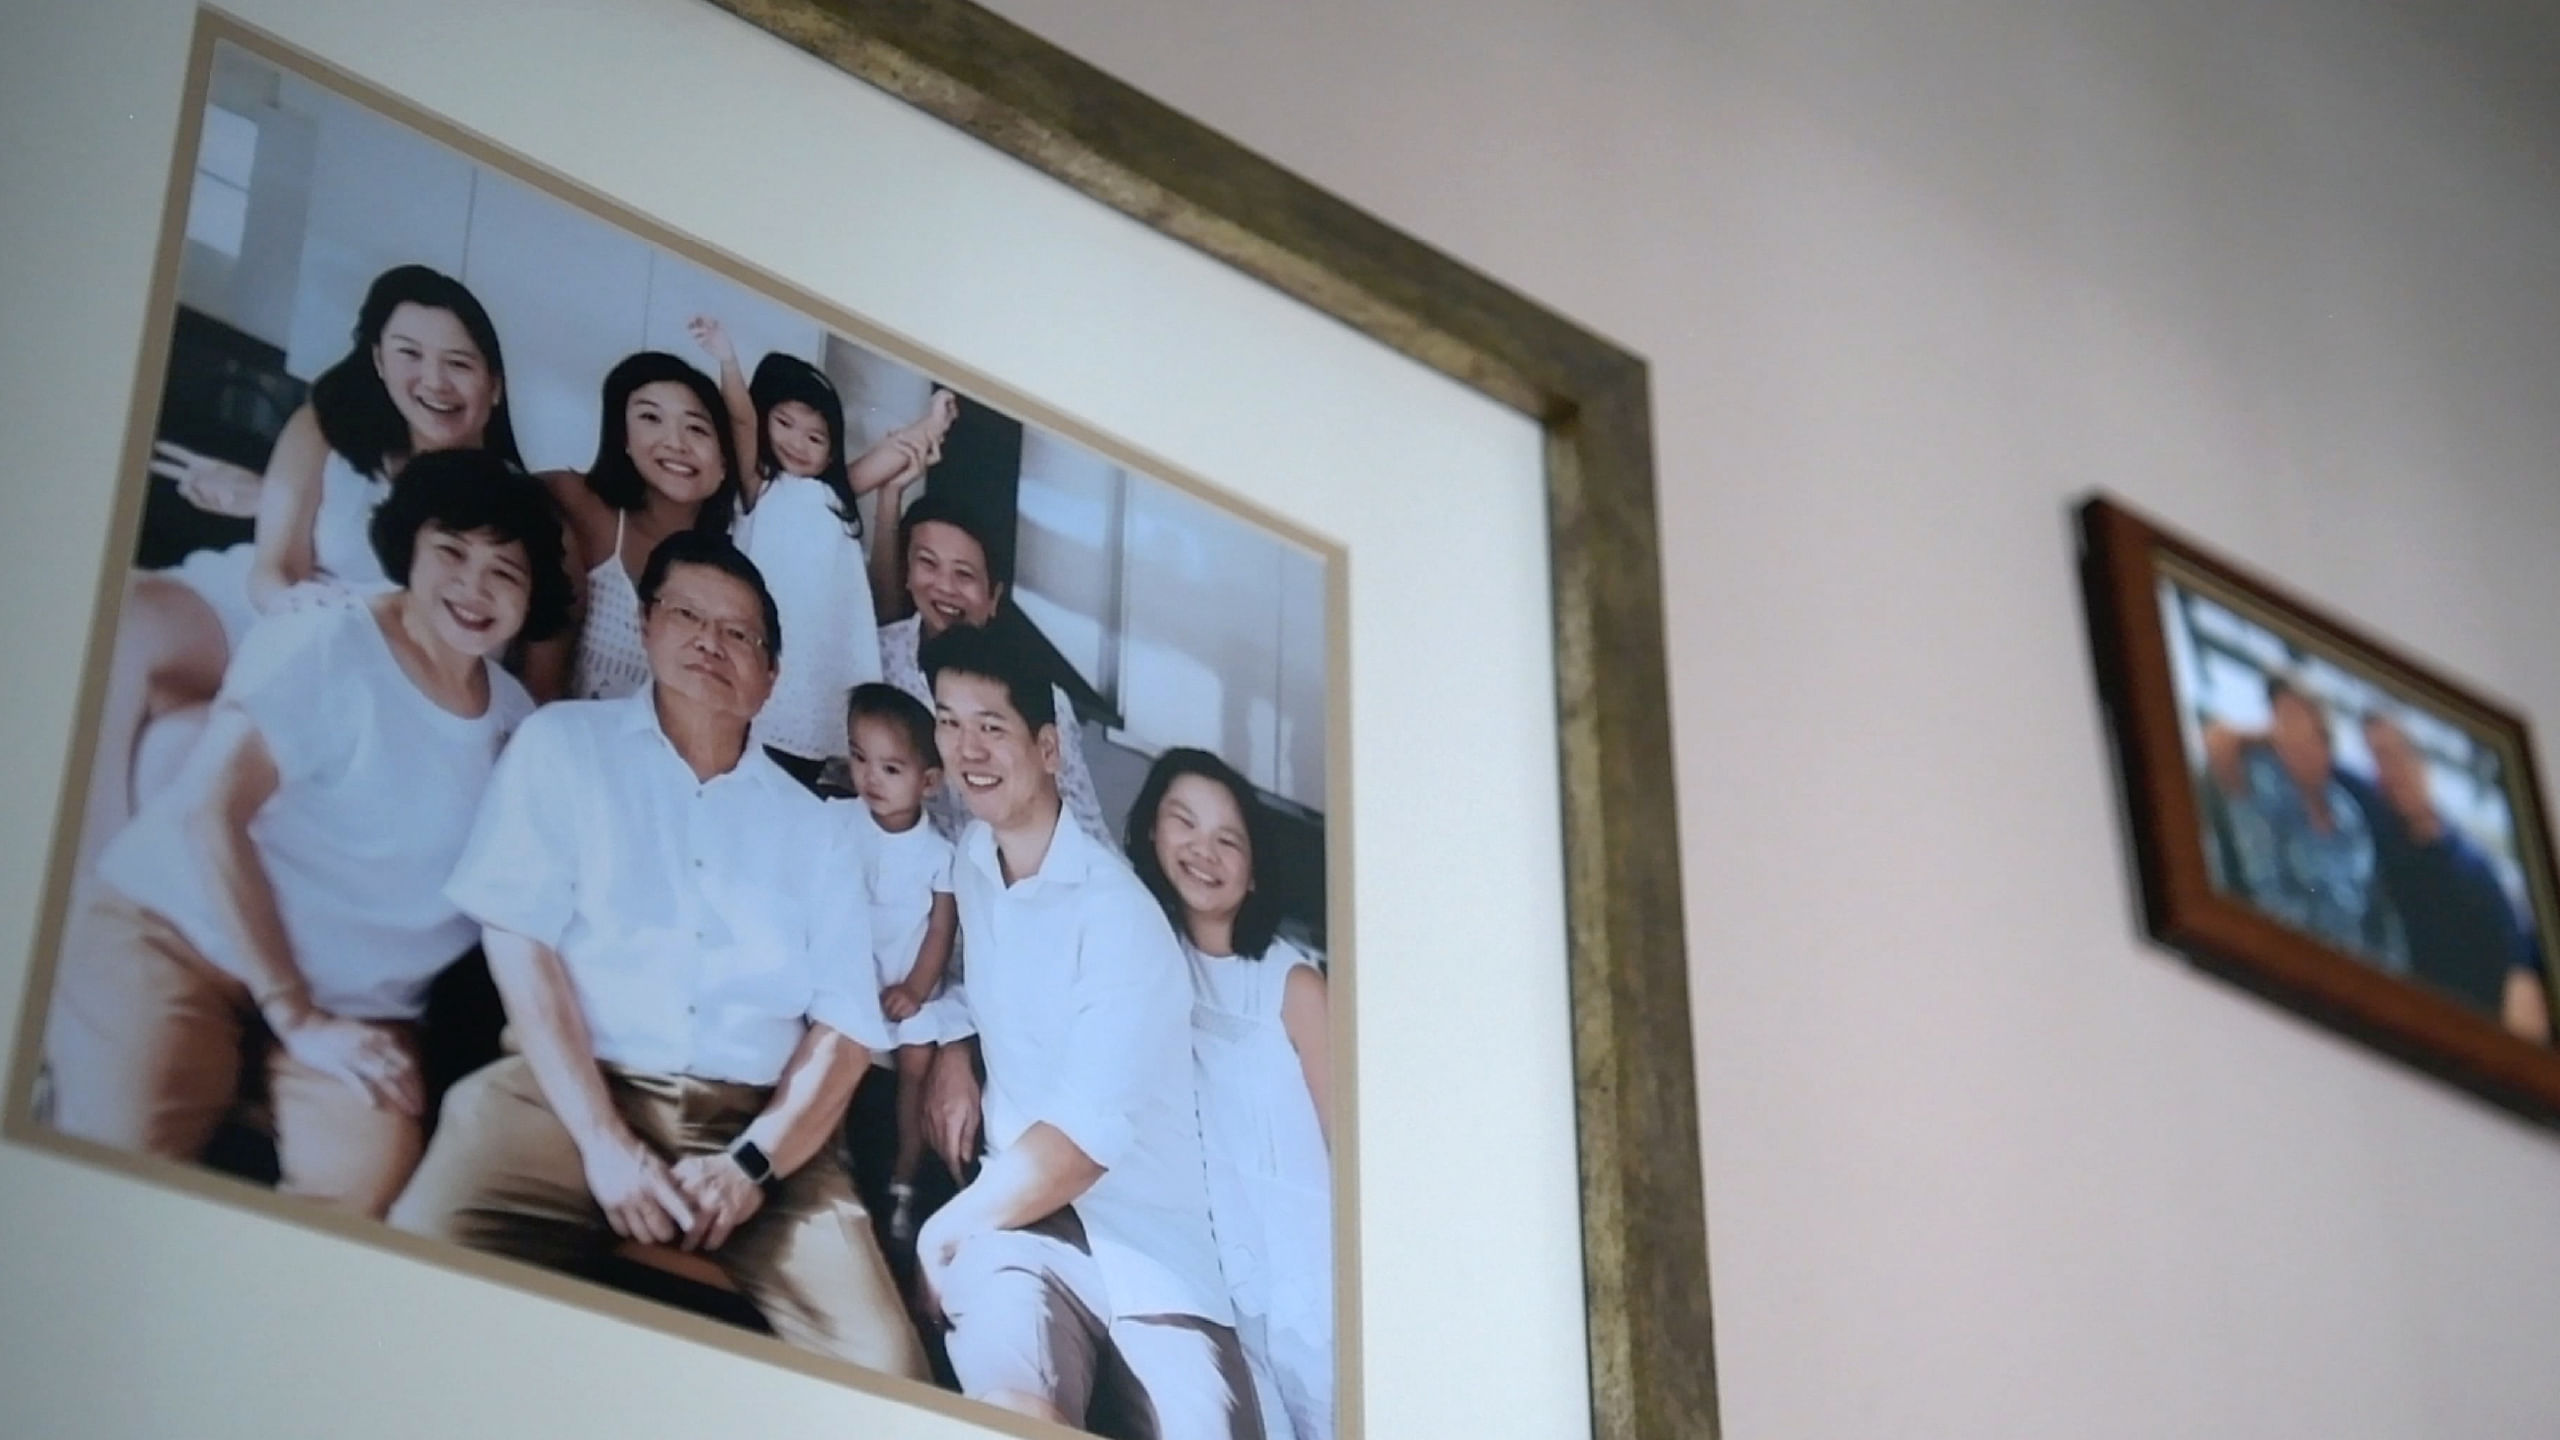 A family photo on the wall at Steven’s home. The family decided to take photographs together when Steven was diagnosed.